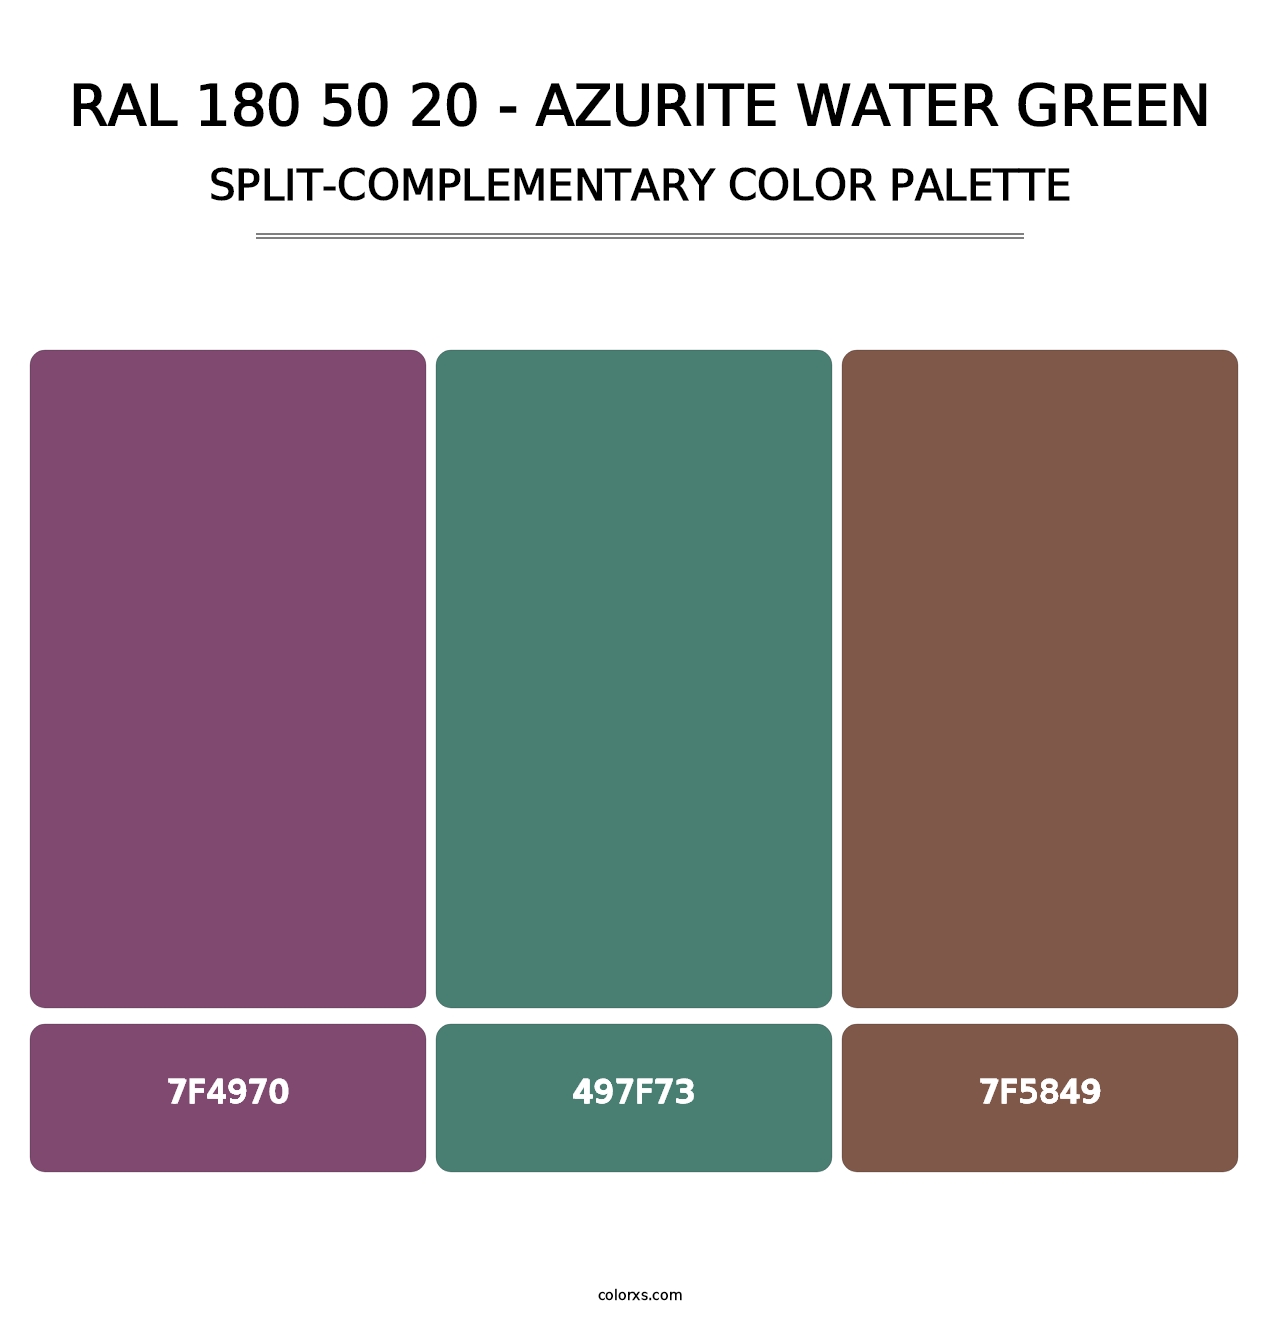 RAL 180 50 20 - Azurite Water Green - Split-Complementary Color Palette